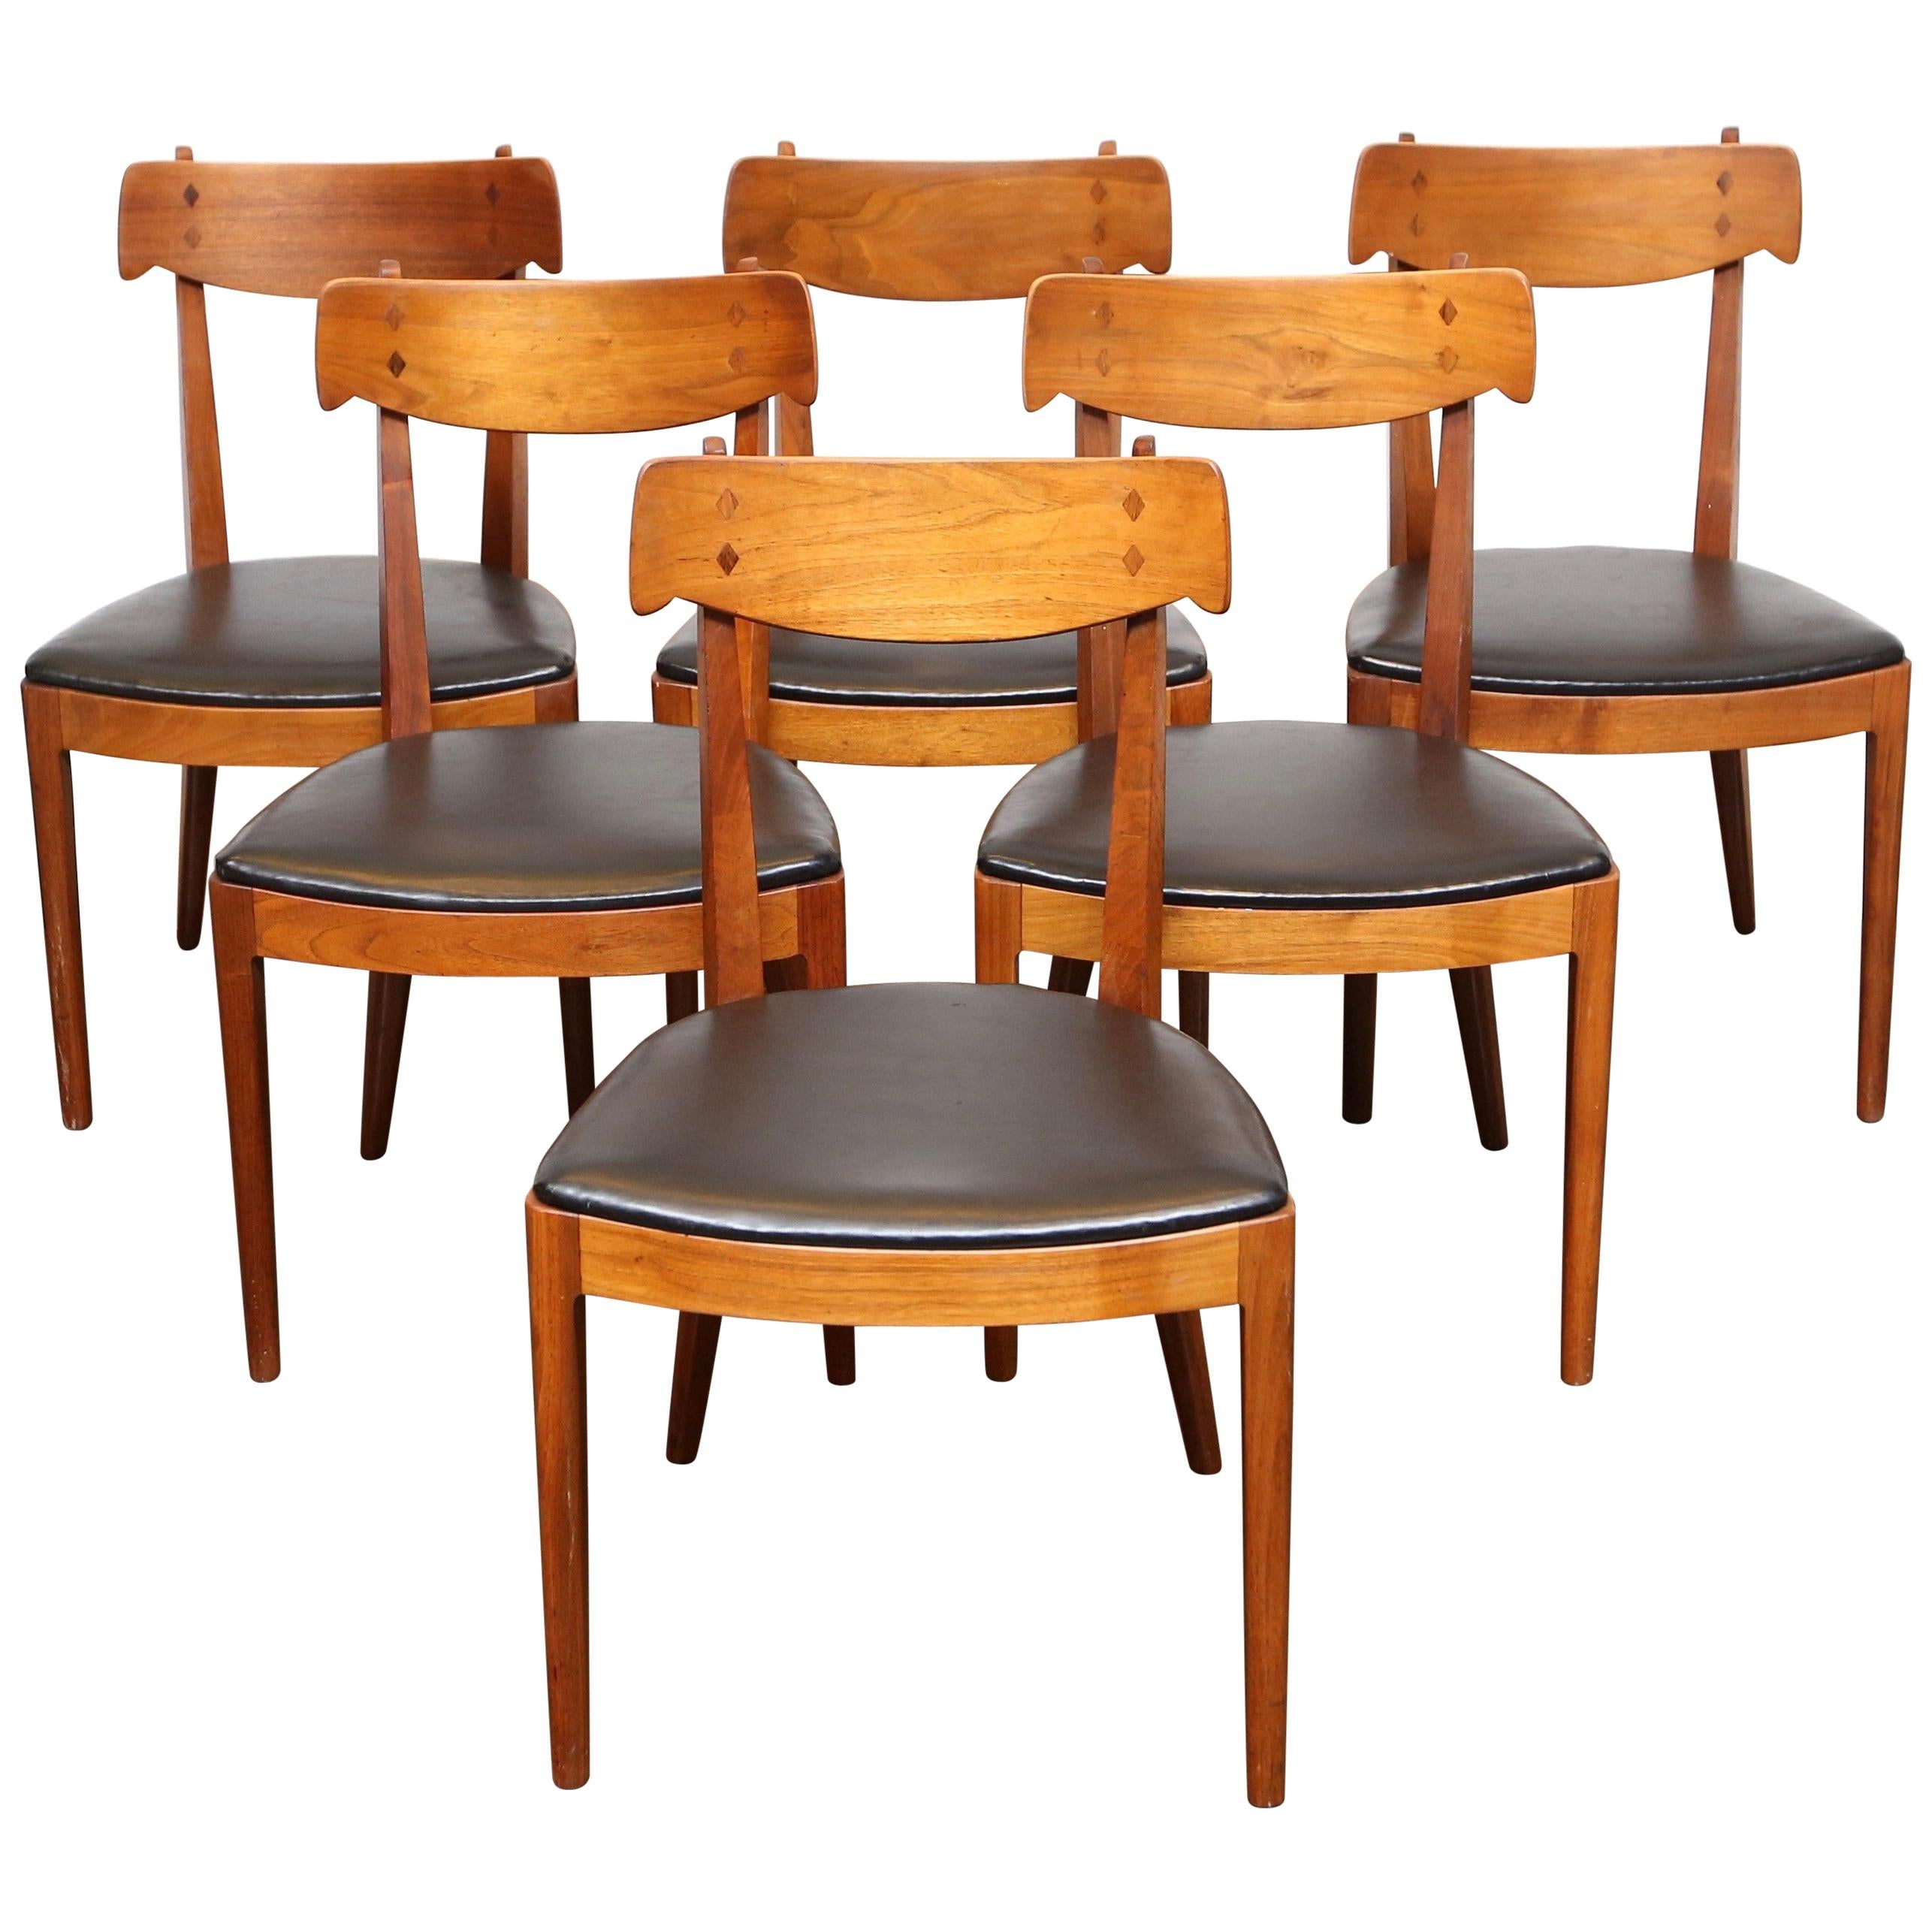 Set of 6 Dining Chairs by Kipp Stewart for Drexel Declaration